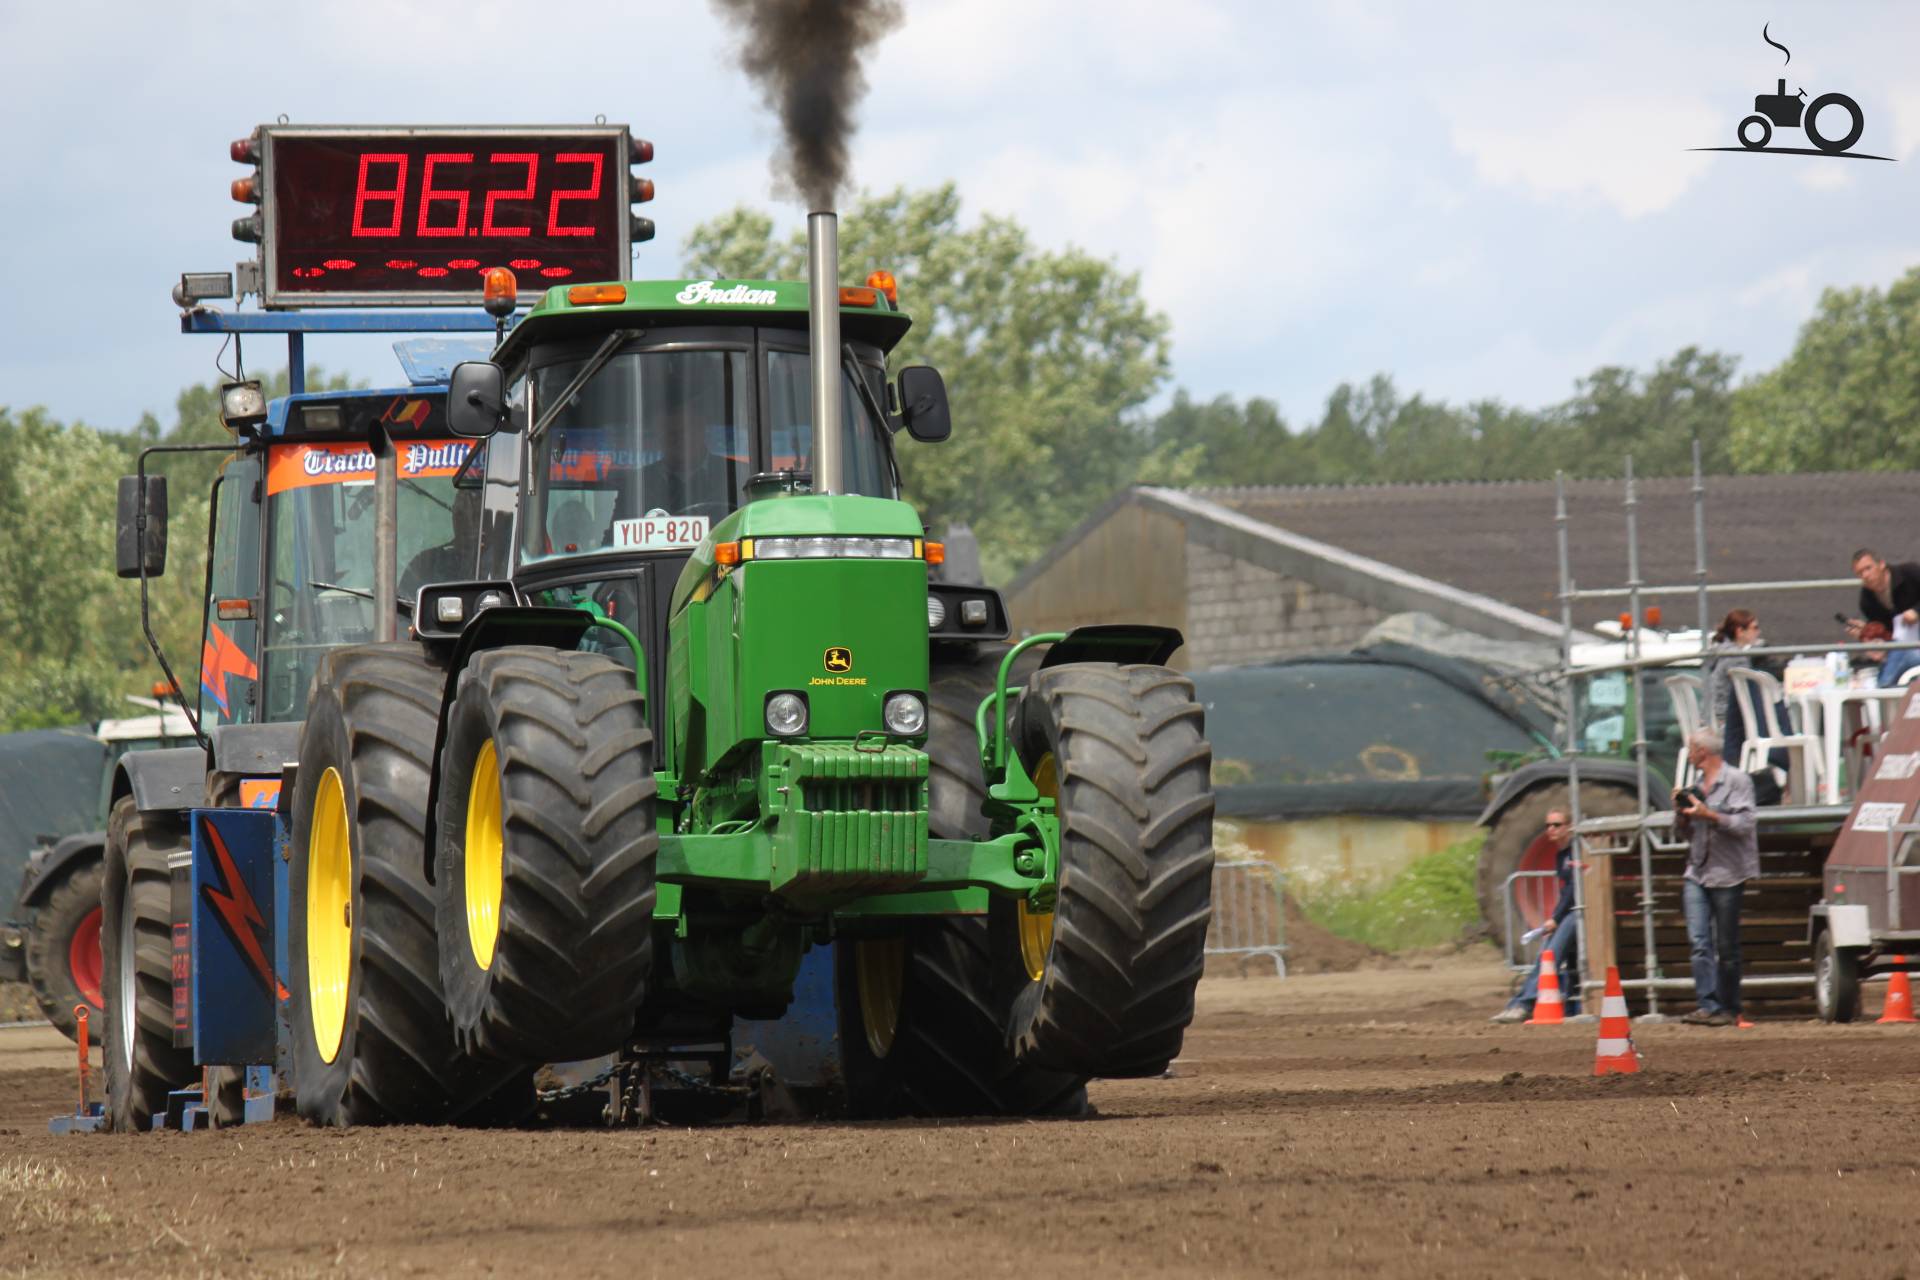 John Deere 4350 Specs and data - Everything about the John Deere 4350